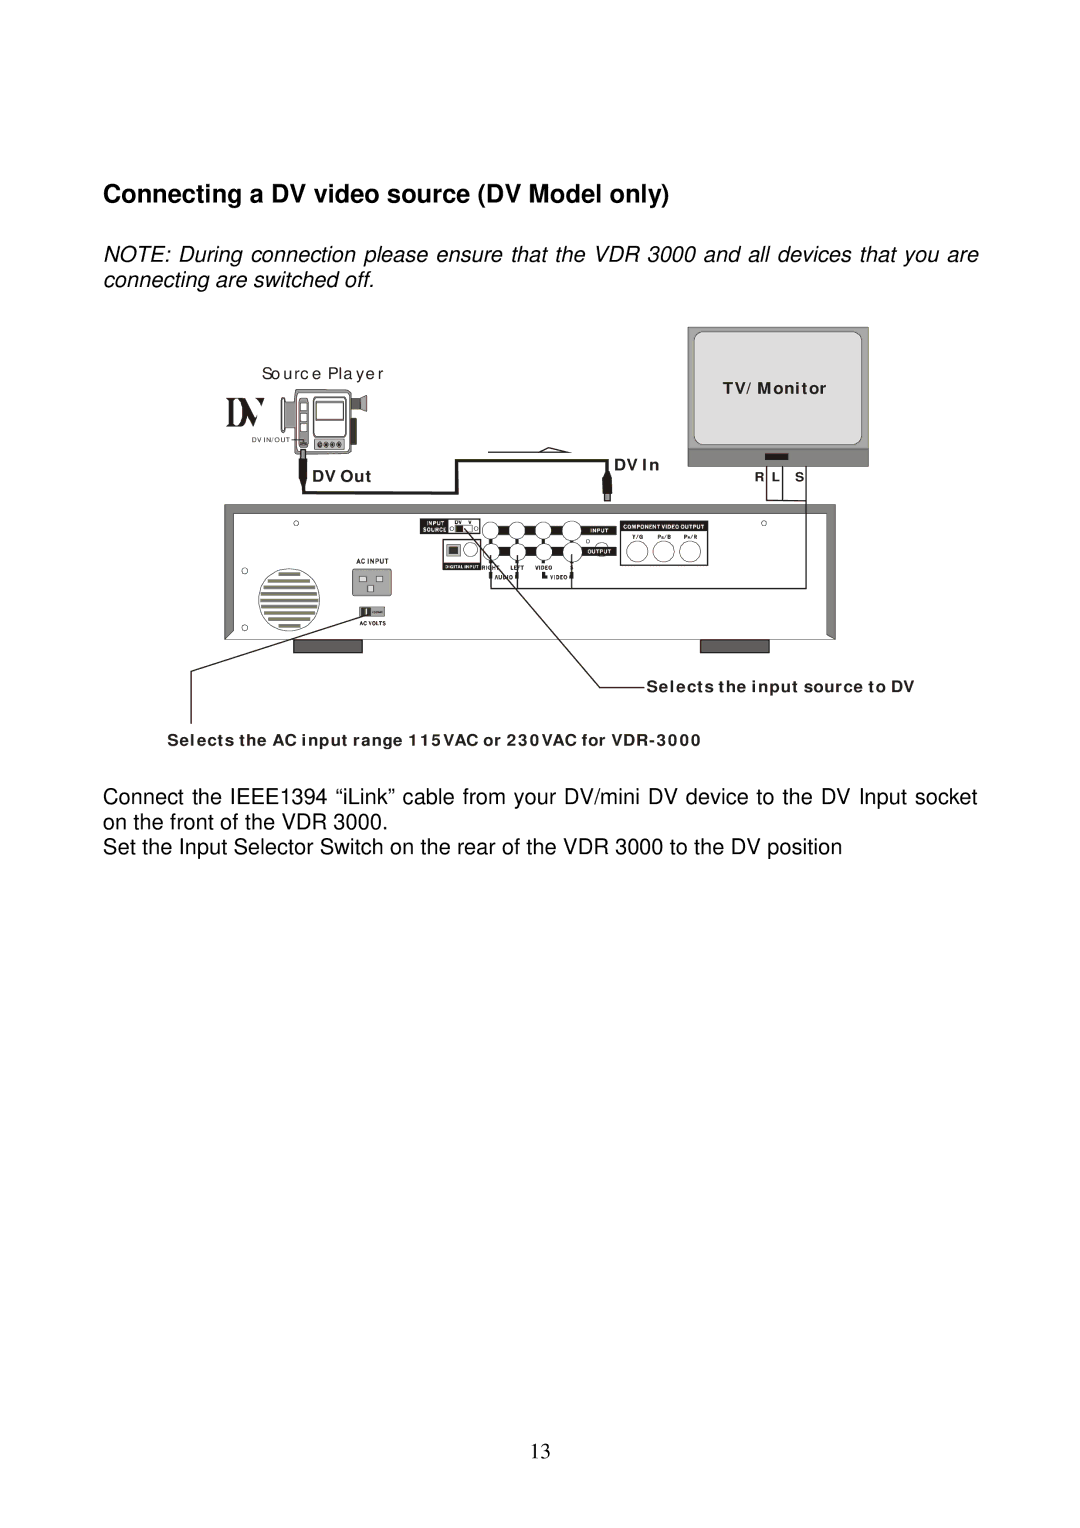 Datavideo VDR-3000 instruction manual Connecting a DV video source DV Model only 